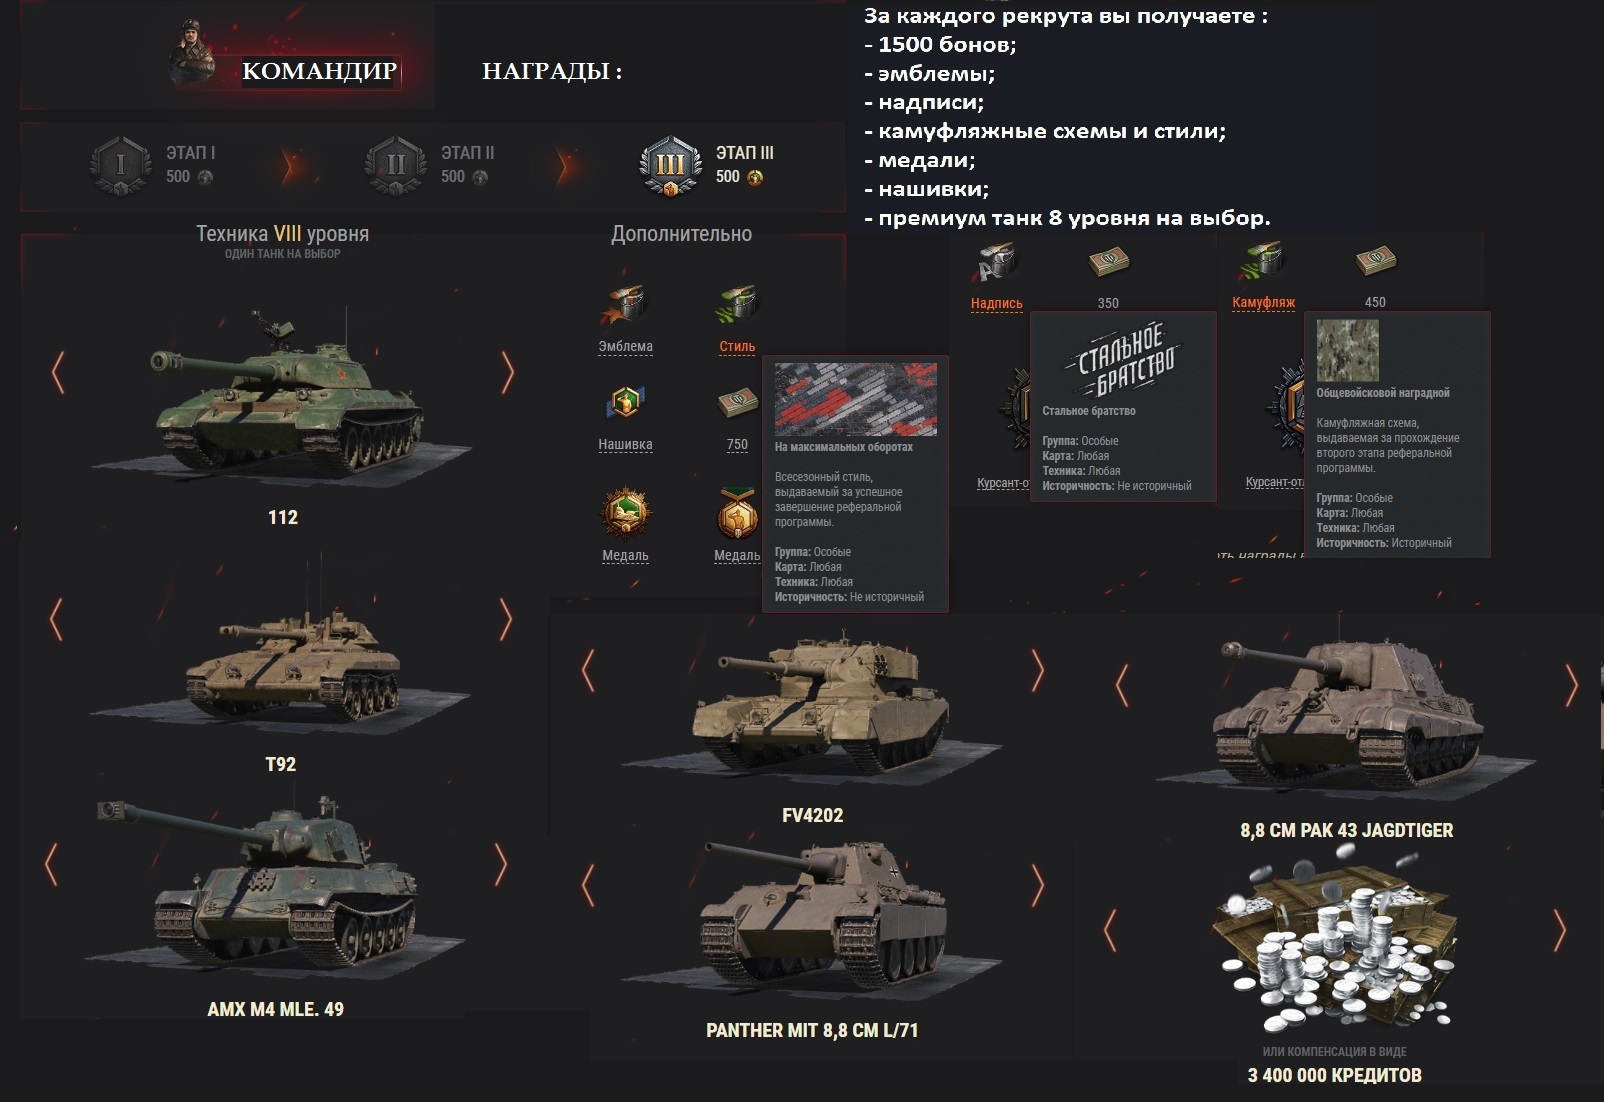 Buy Recruit Wot 3000 Bonds 2 Premium Tank Tier 8 Anyserv And Download